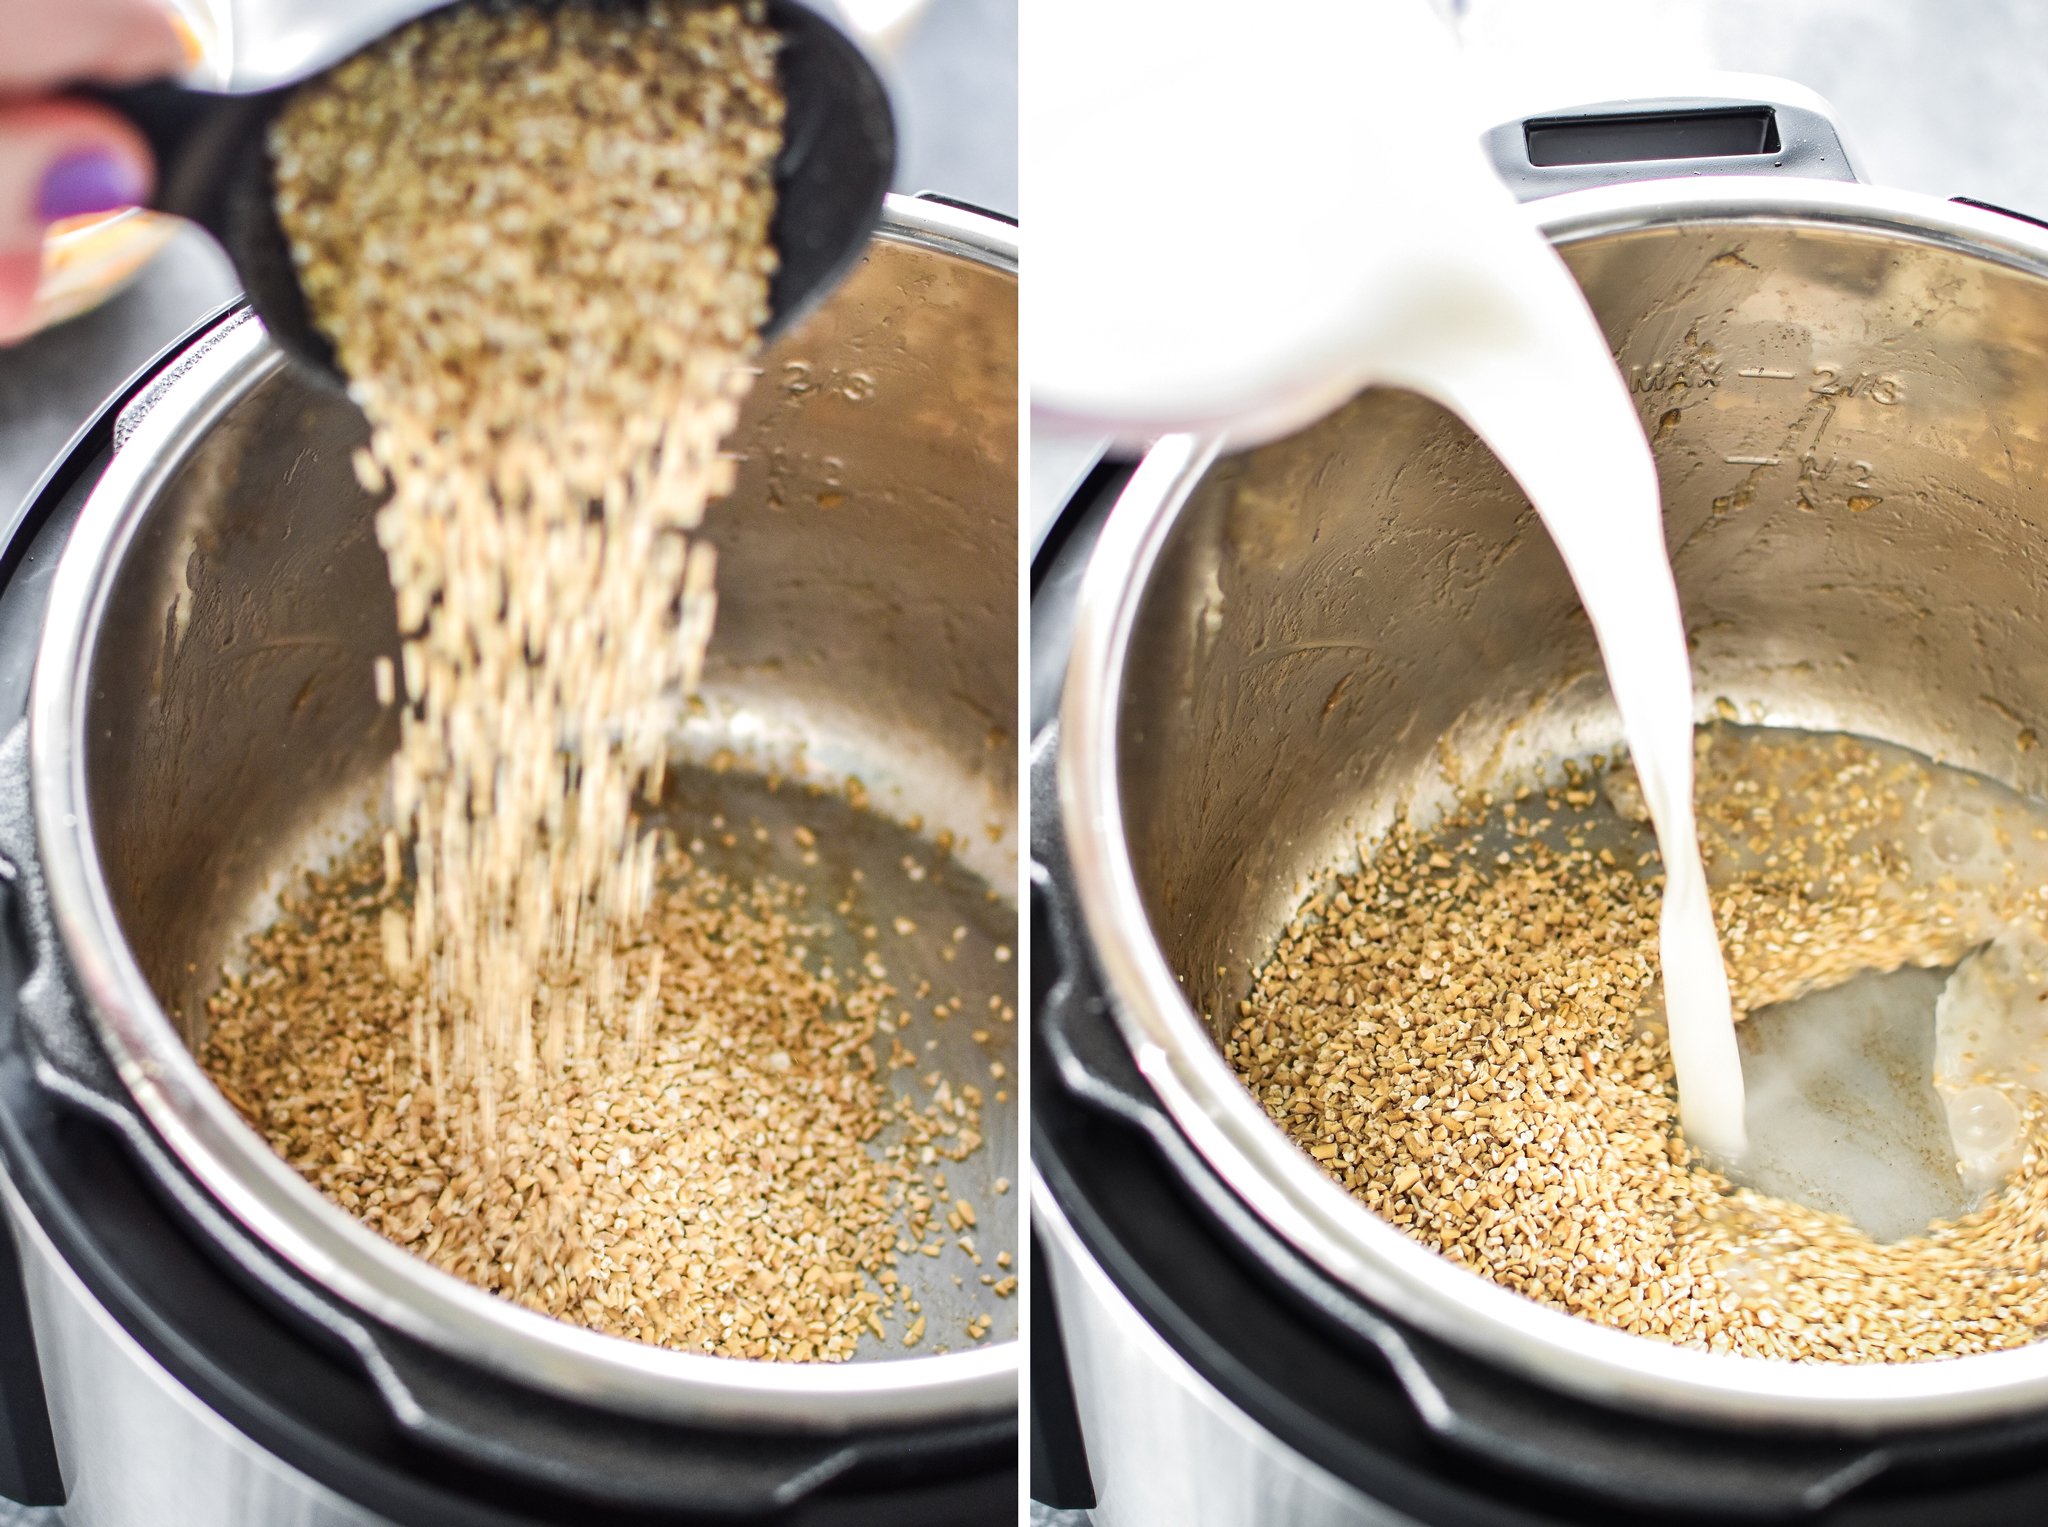 Left: Pouring steel cut oats into the Instant Pot. Right: Pouring milk and water liquid into the Instant Pot.